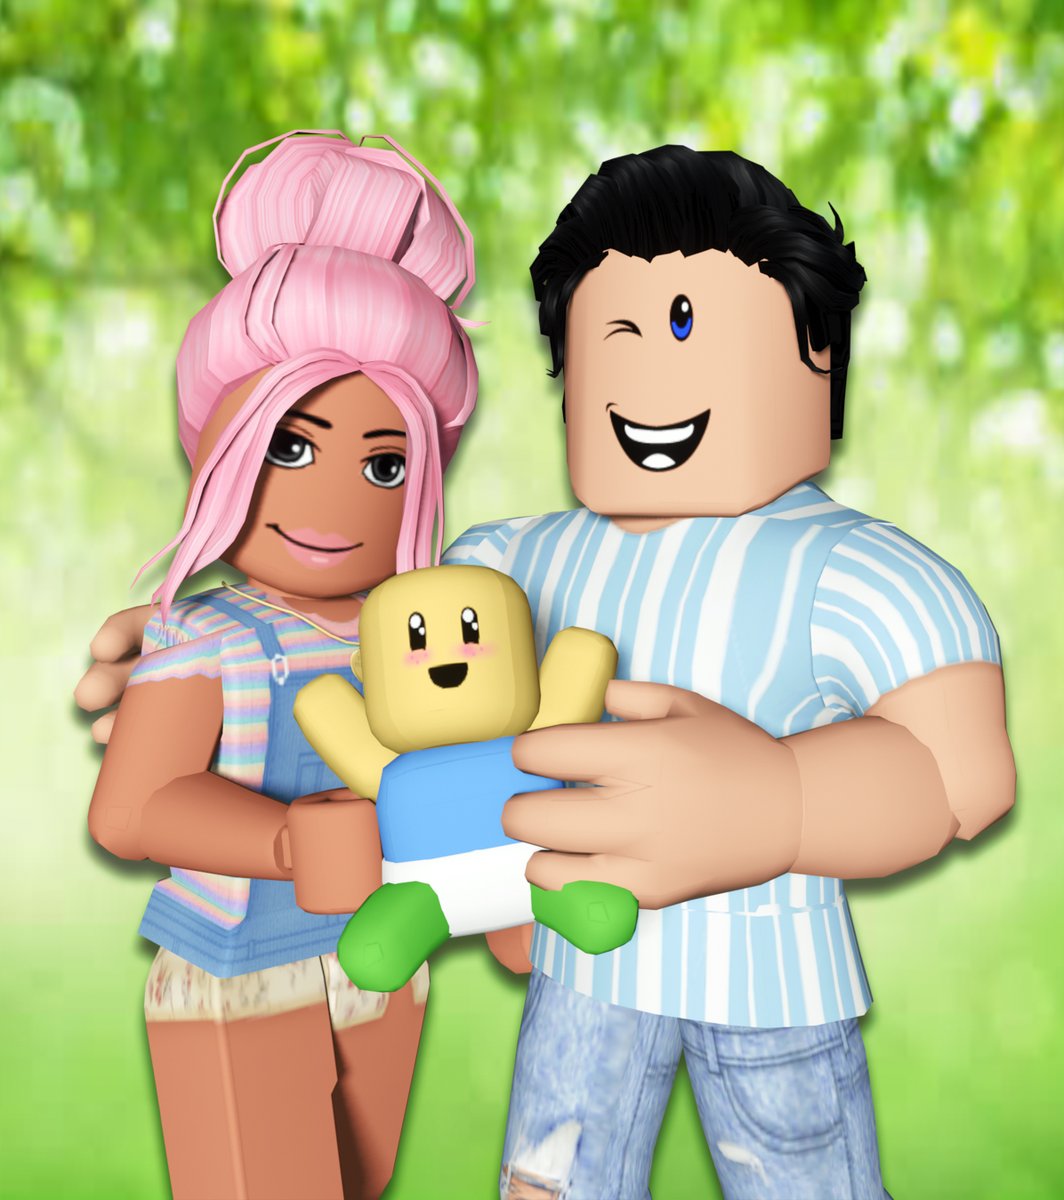 Phoebe On Twitter Loool I Created The Cutest Family Pictures On Roblox To Add To My Bloxburg House Ngl This One Is My Fav Vid Coming Soon Https T Co Imshedp22j - phoeberry roblox bloxburg poppy